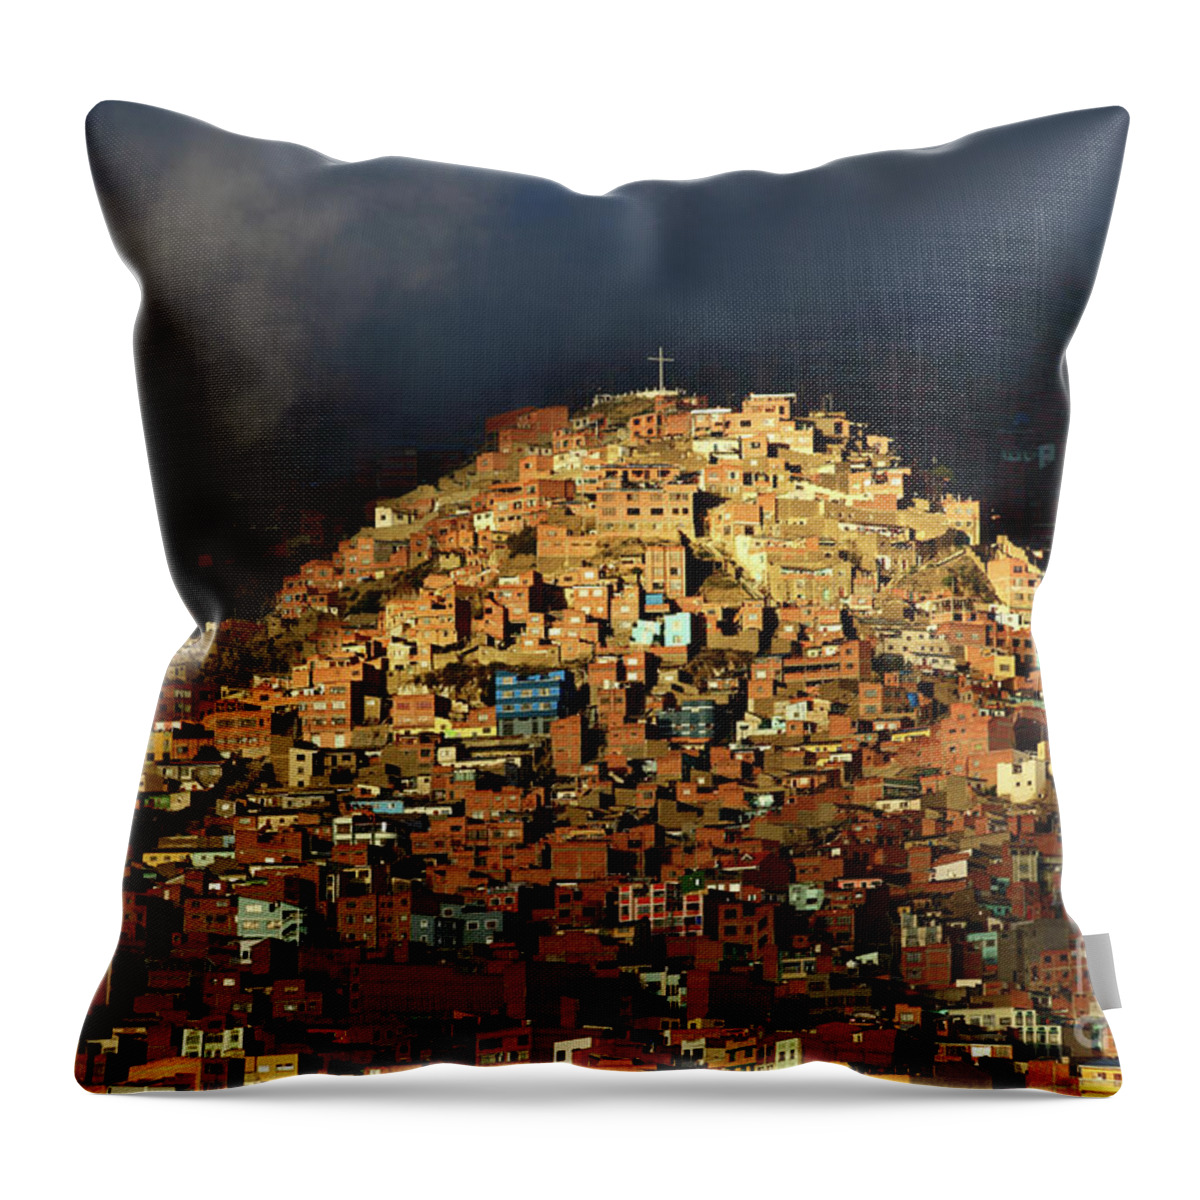 La Paz Throw Pillow featuring the photograph Urban Cross 2 by James Brunker